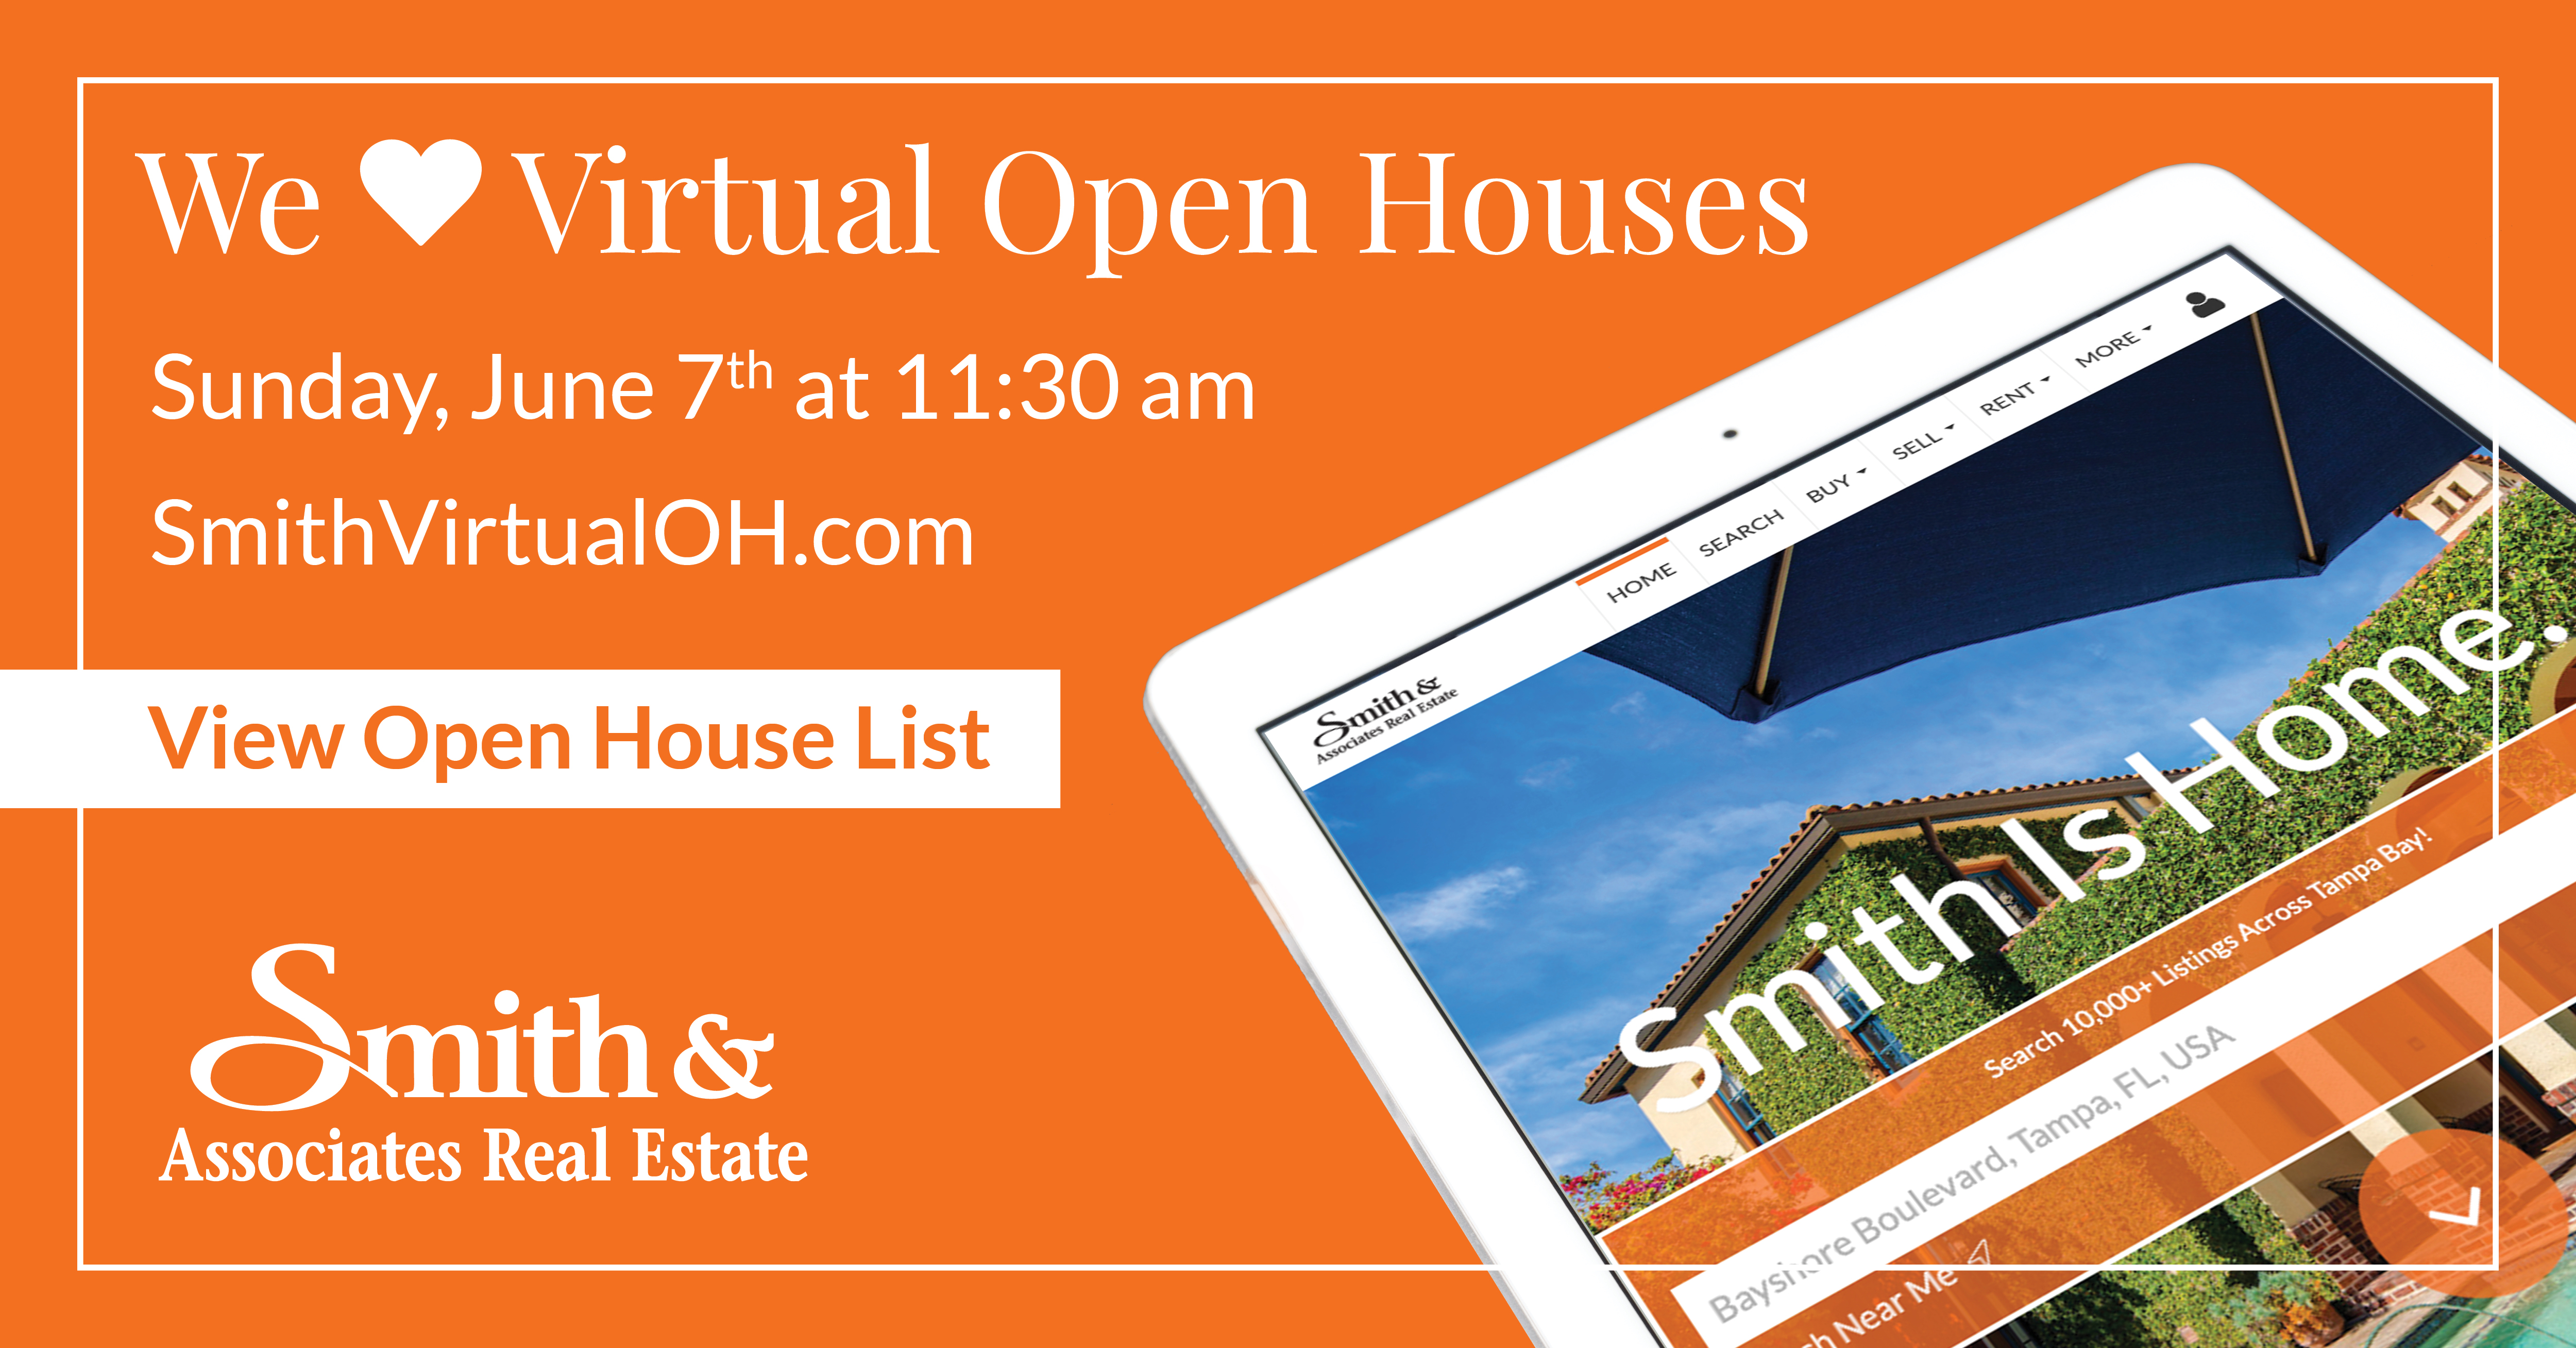 Marketing for the Virtual Open House